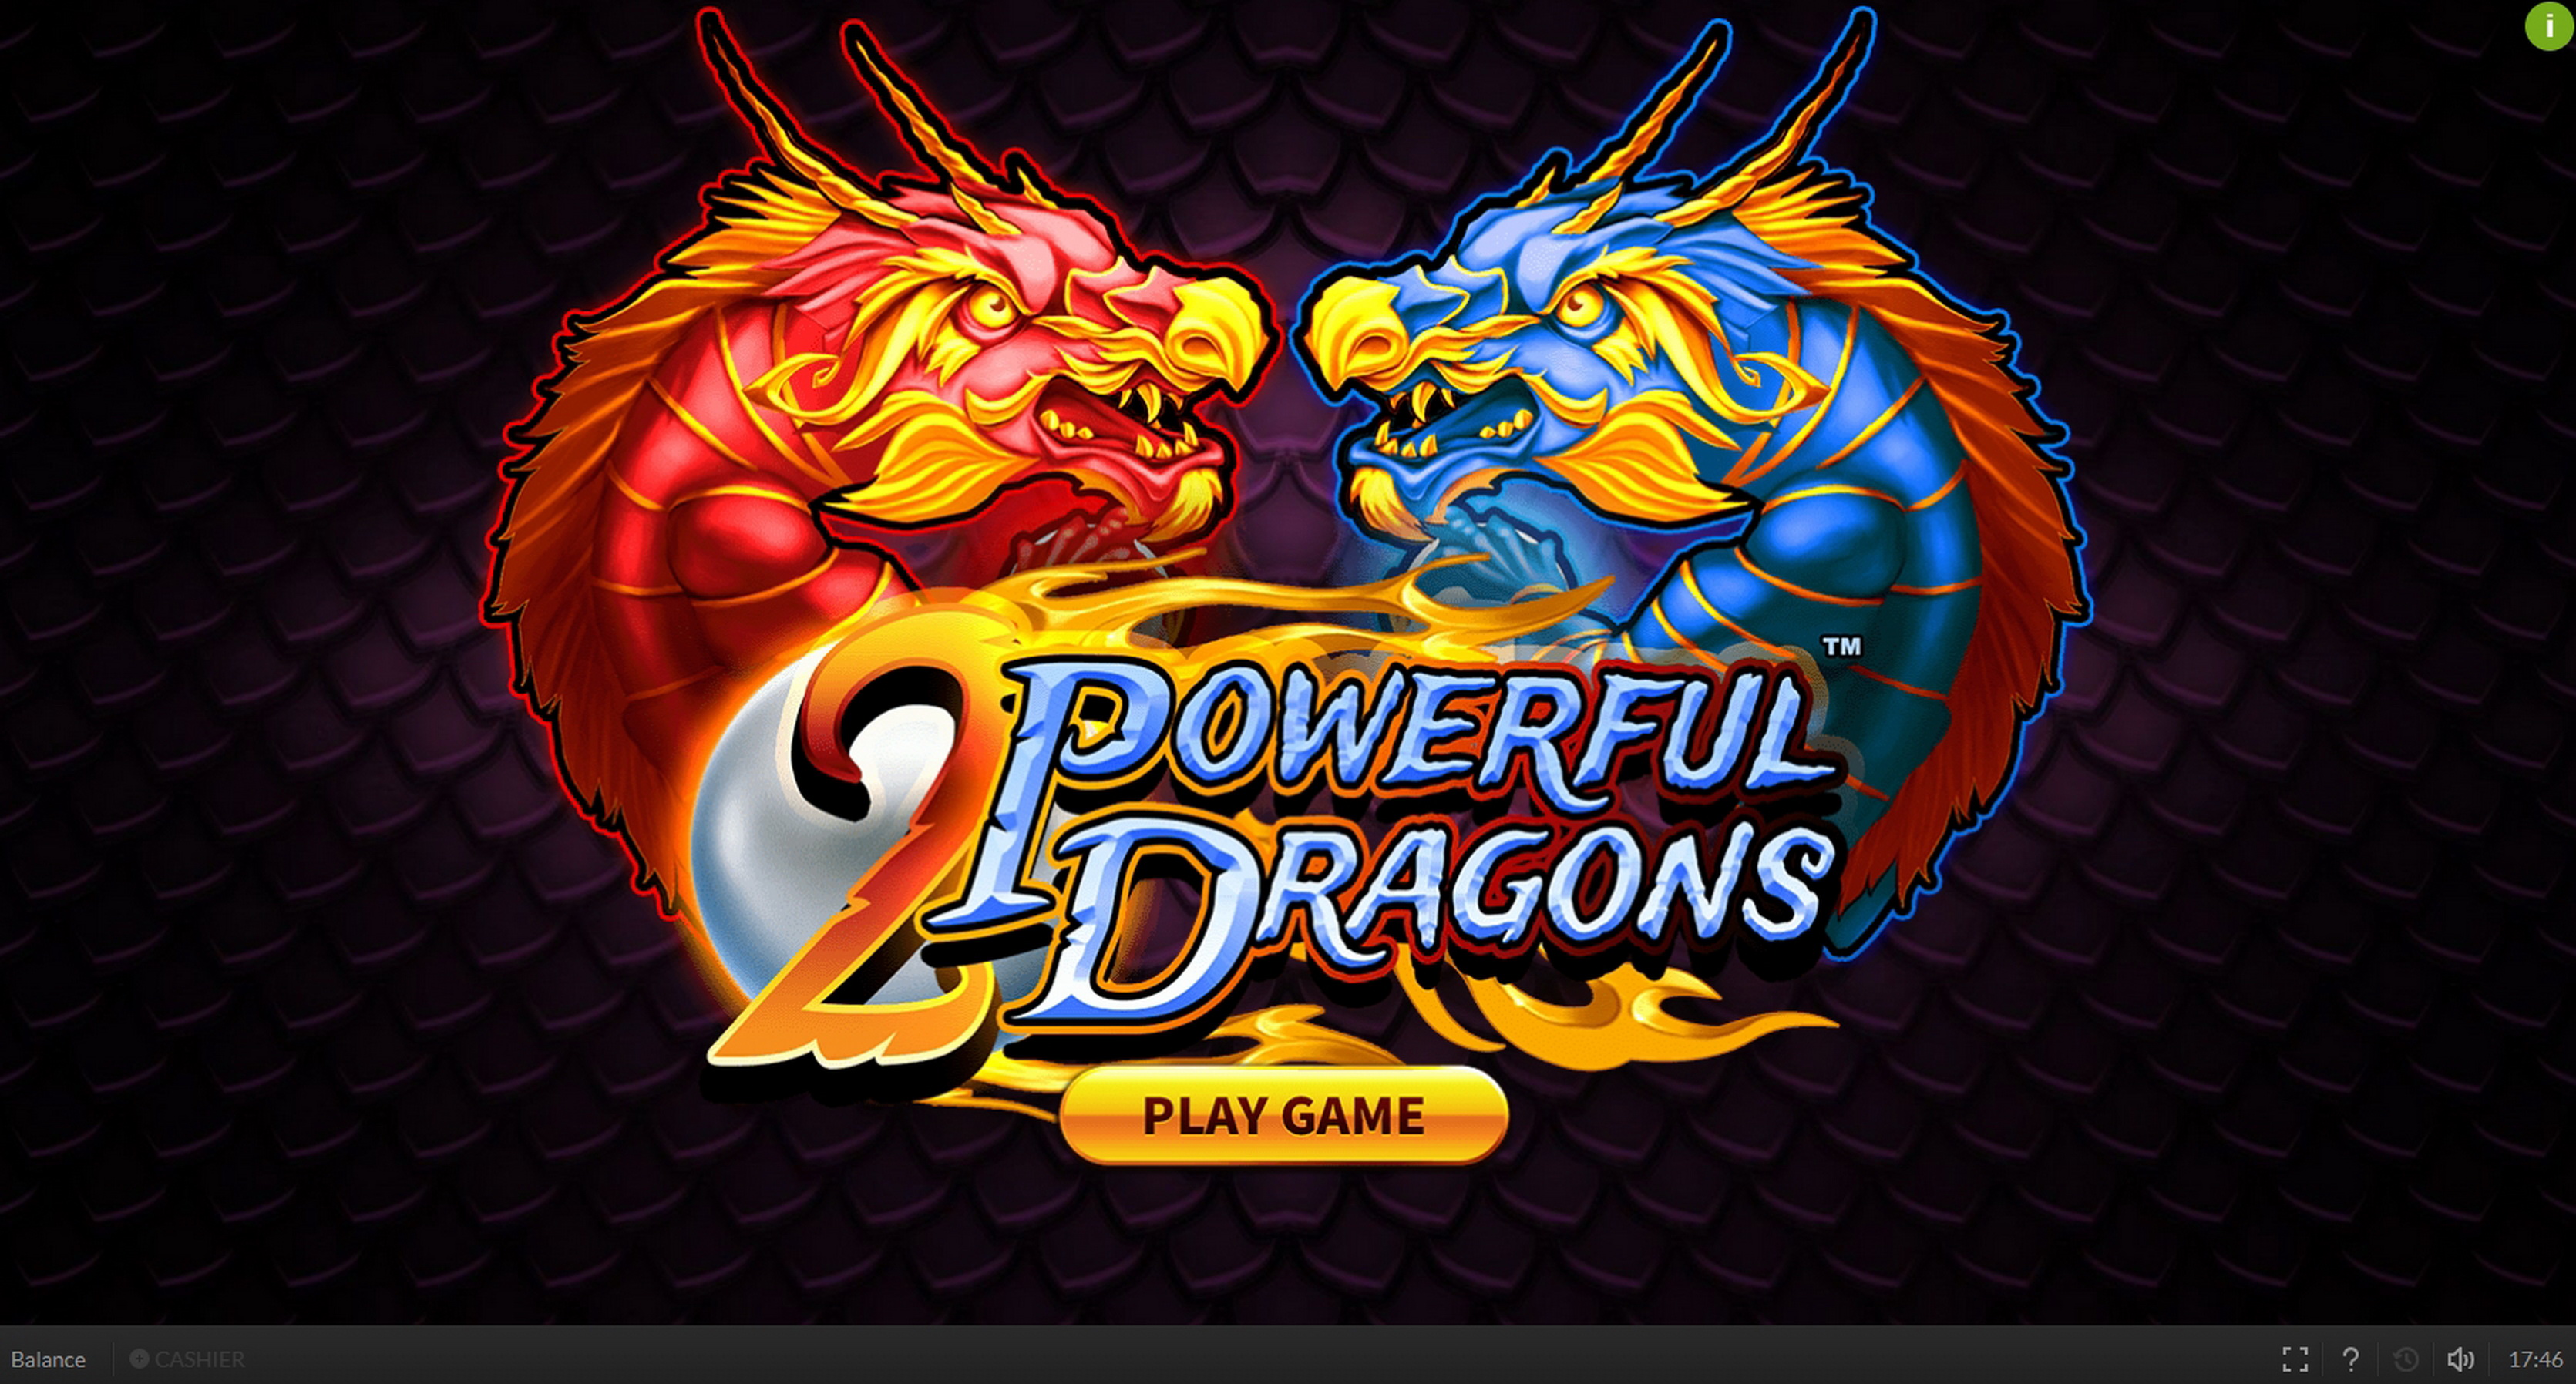 Play 2 Powerful Dragons Free Casino Slot Game by Skywind